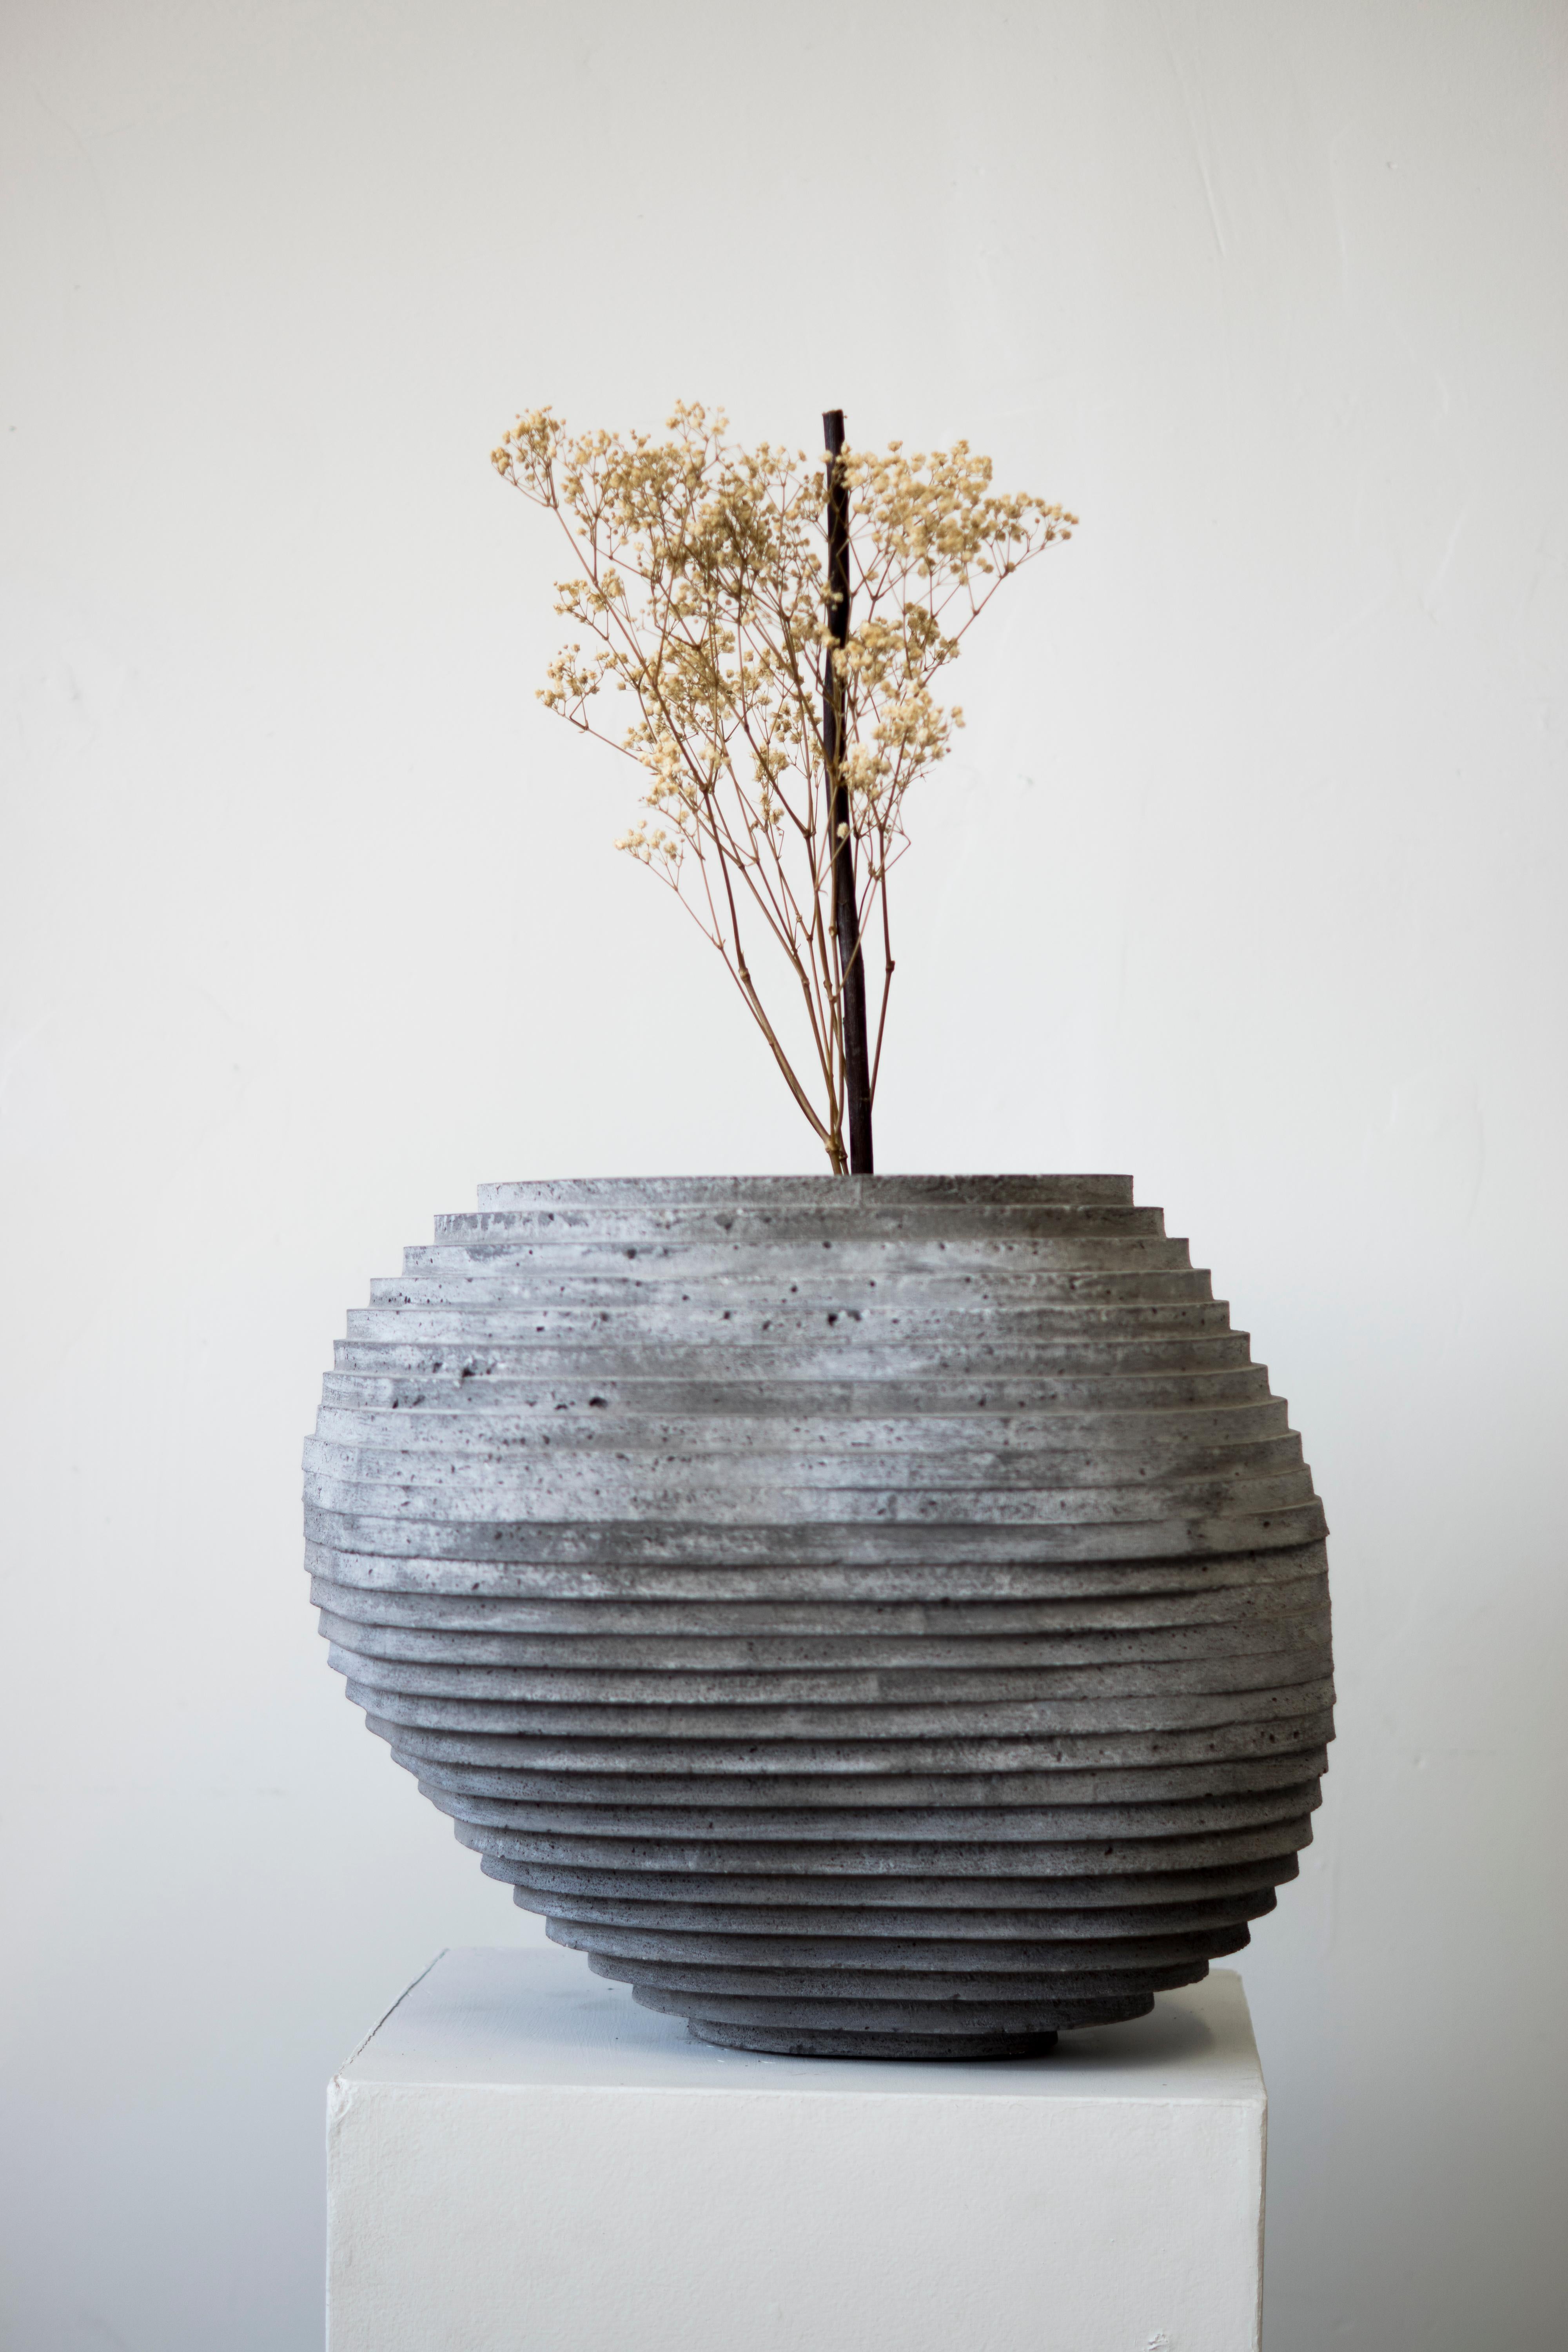 Large hand-cast planter for indoor and outdoor use. Drainage holes can be added upon request.

At the intersection of art, craft, and design, Concrete Poetics' debut collection of hand-cast cement sculptural furniture and accessories streamlines